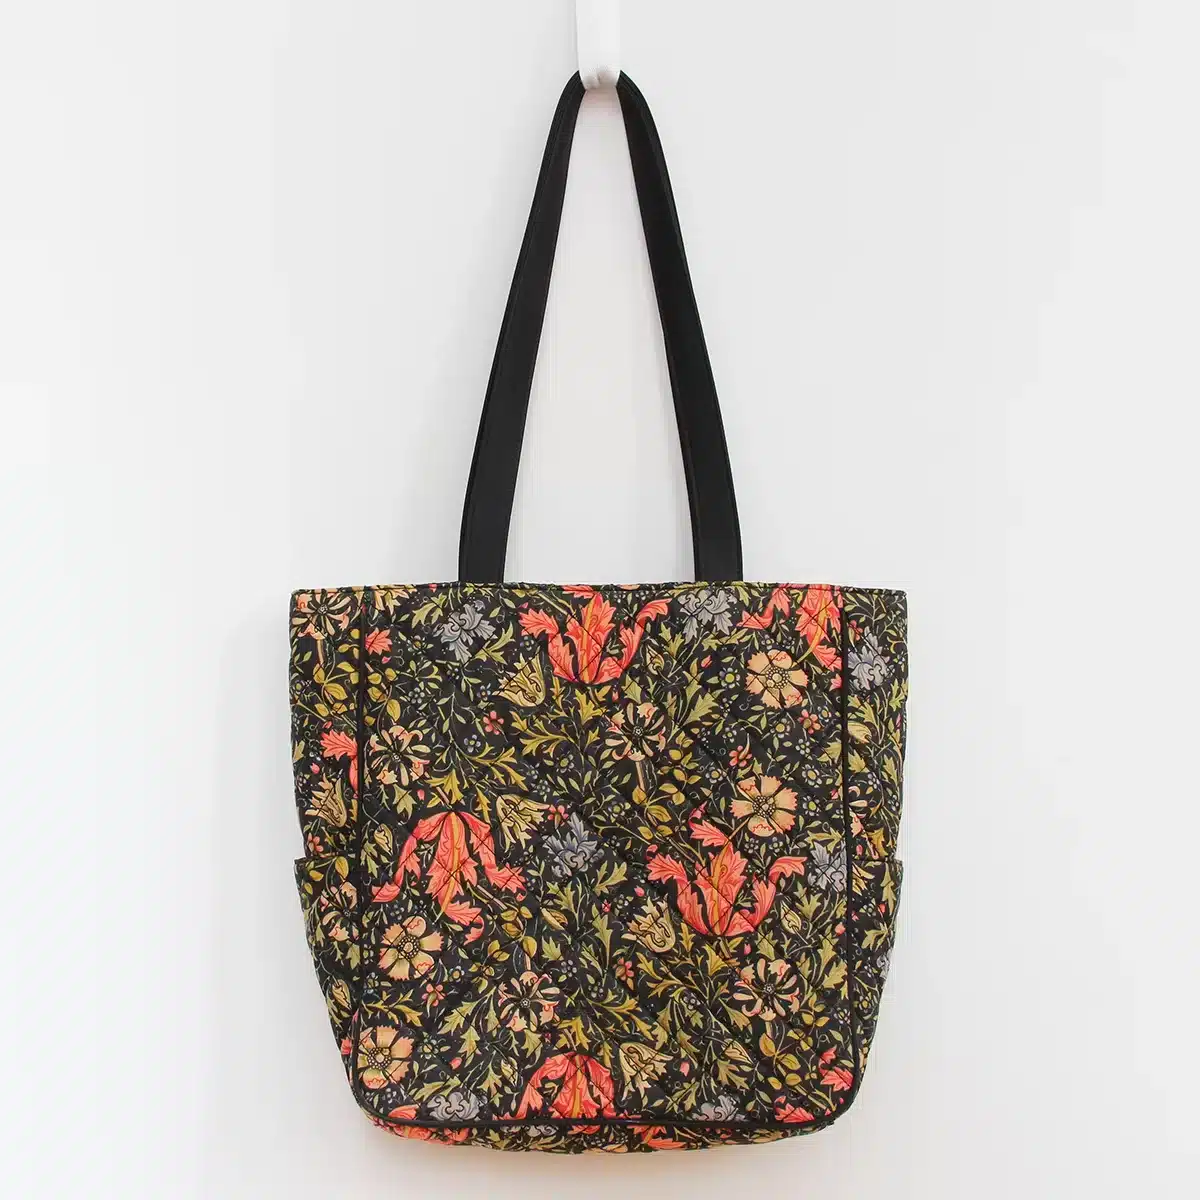 Custom Quilted Tote Bags with print